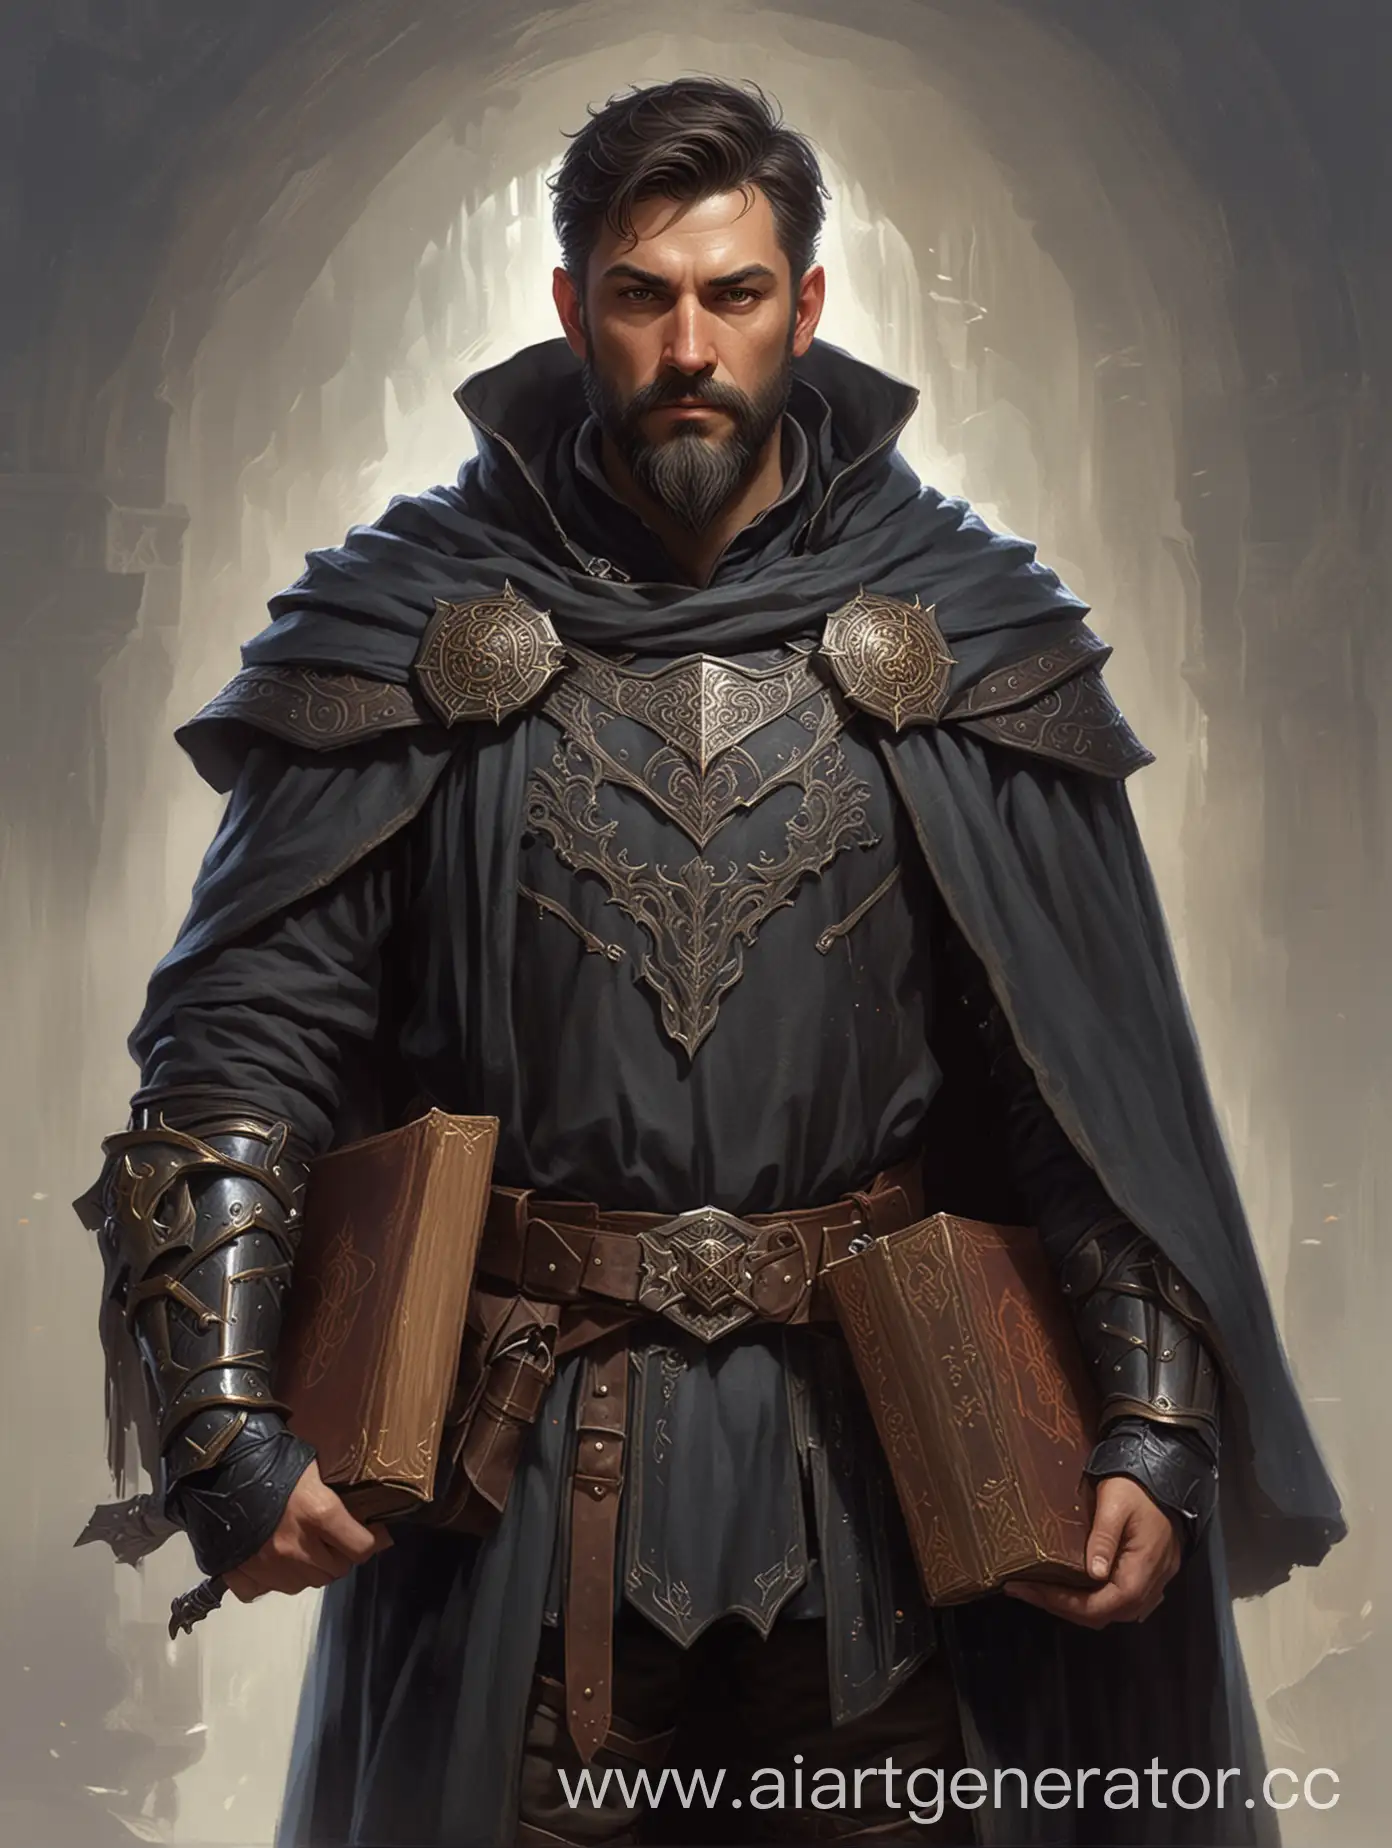 MiddleAged-Fantasy-Mage-in-Armor-and-Cloak-with-Spellbook